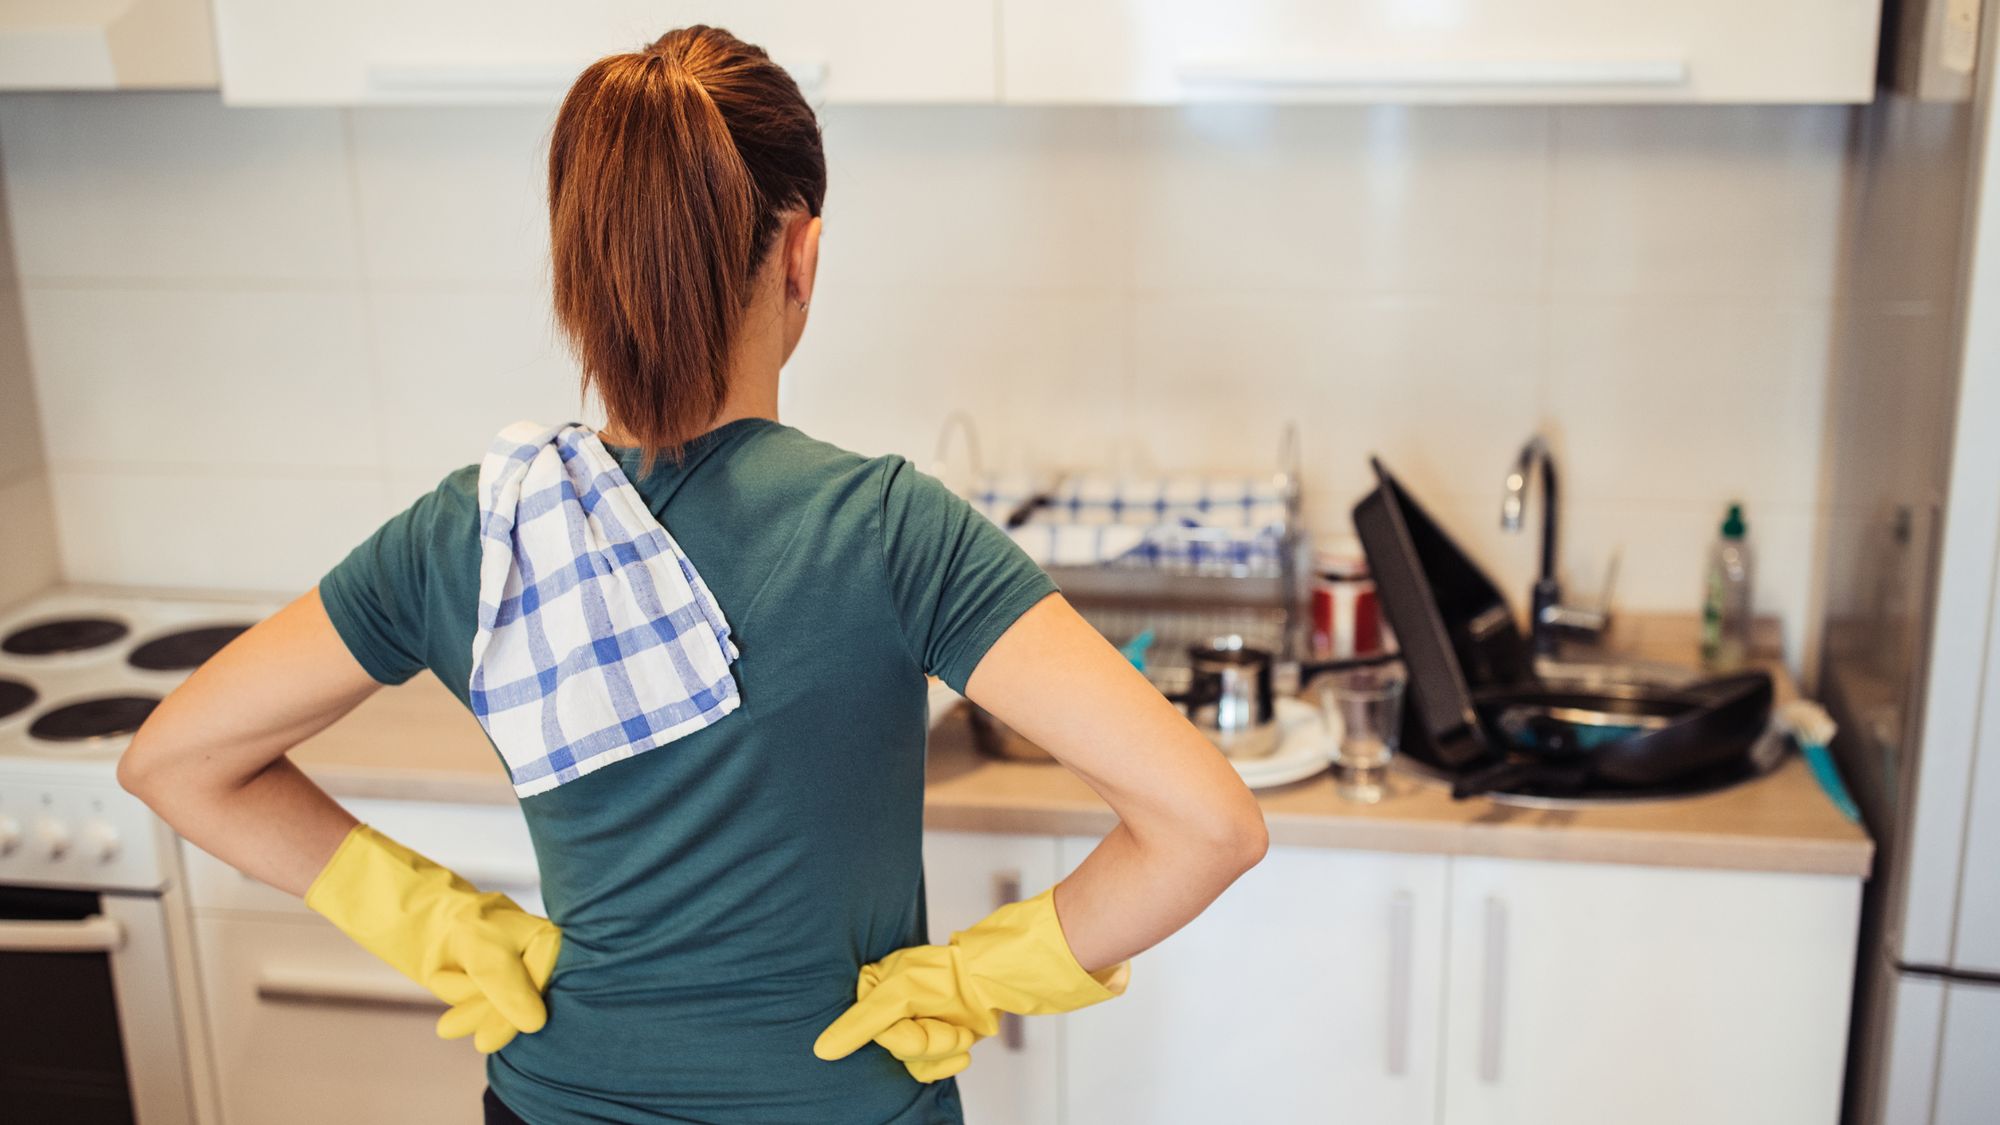 5 Common Stains in the Kitchen and How To Clean Them